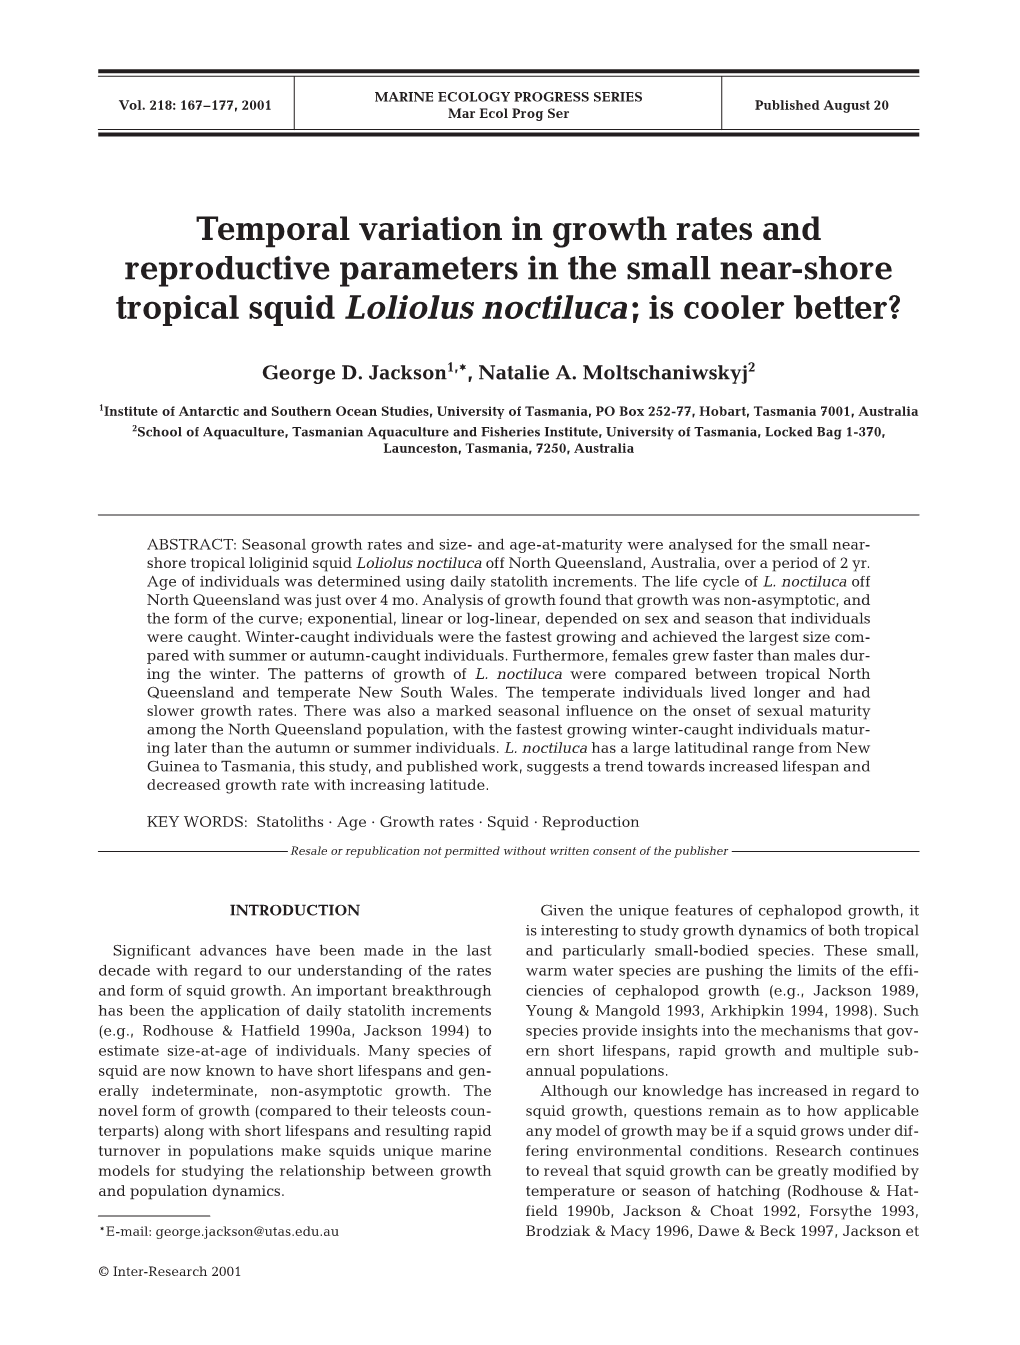 Temporal Variation in Growth Rates and Reproductive Parameters in the Small Near-Shore Tropical Squid Loliolus Noctiluca; Is Cooler Better?